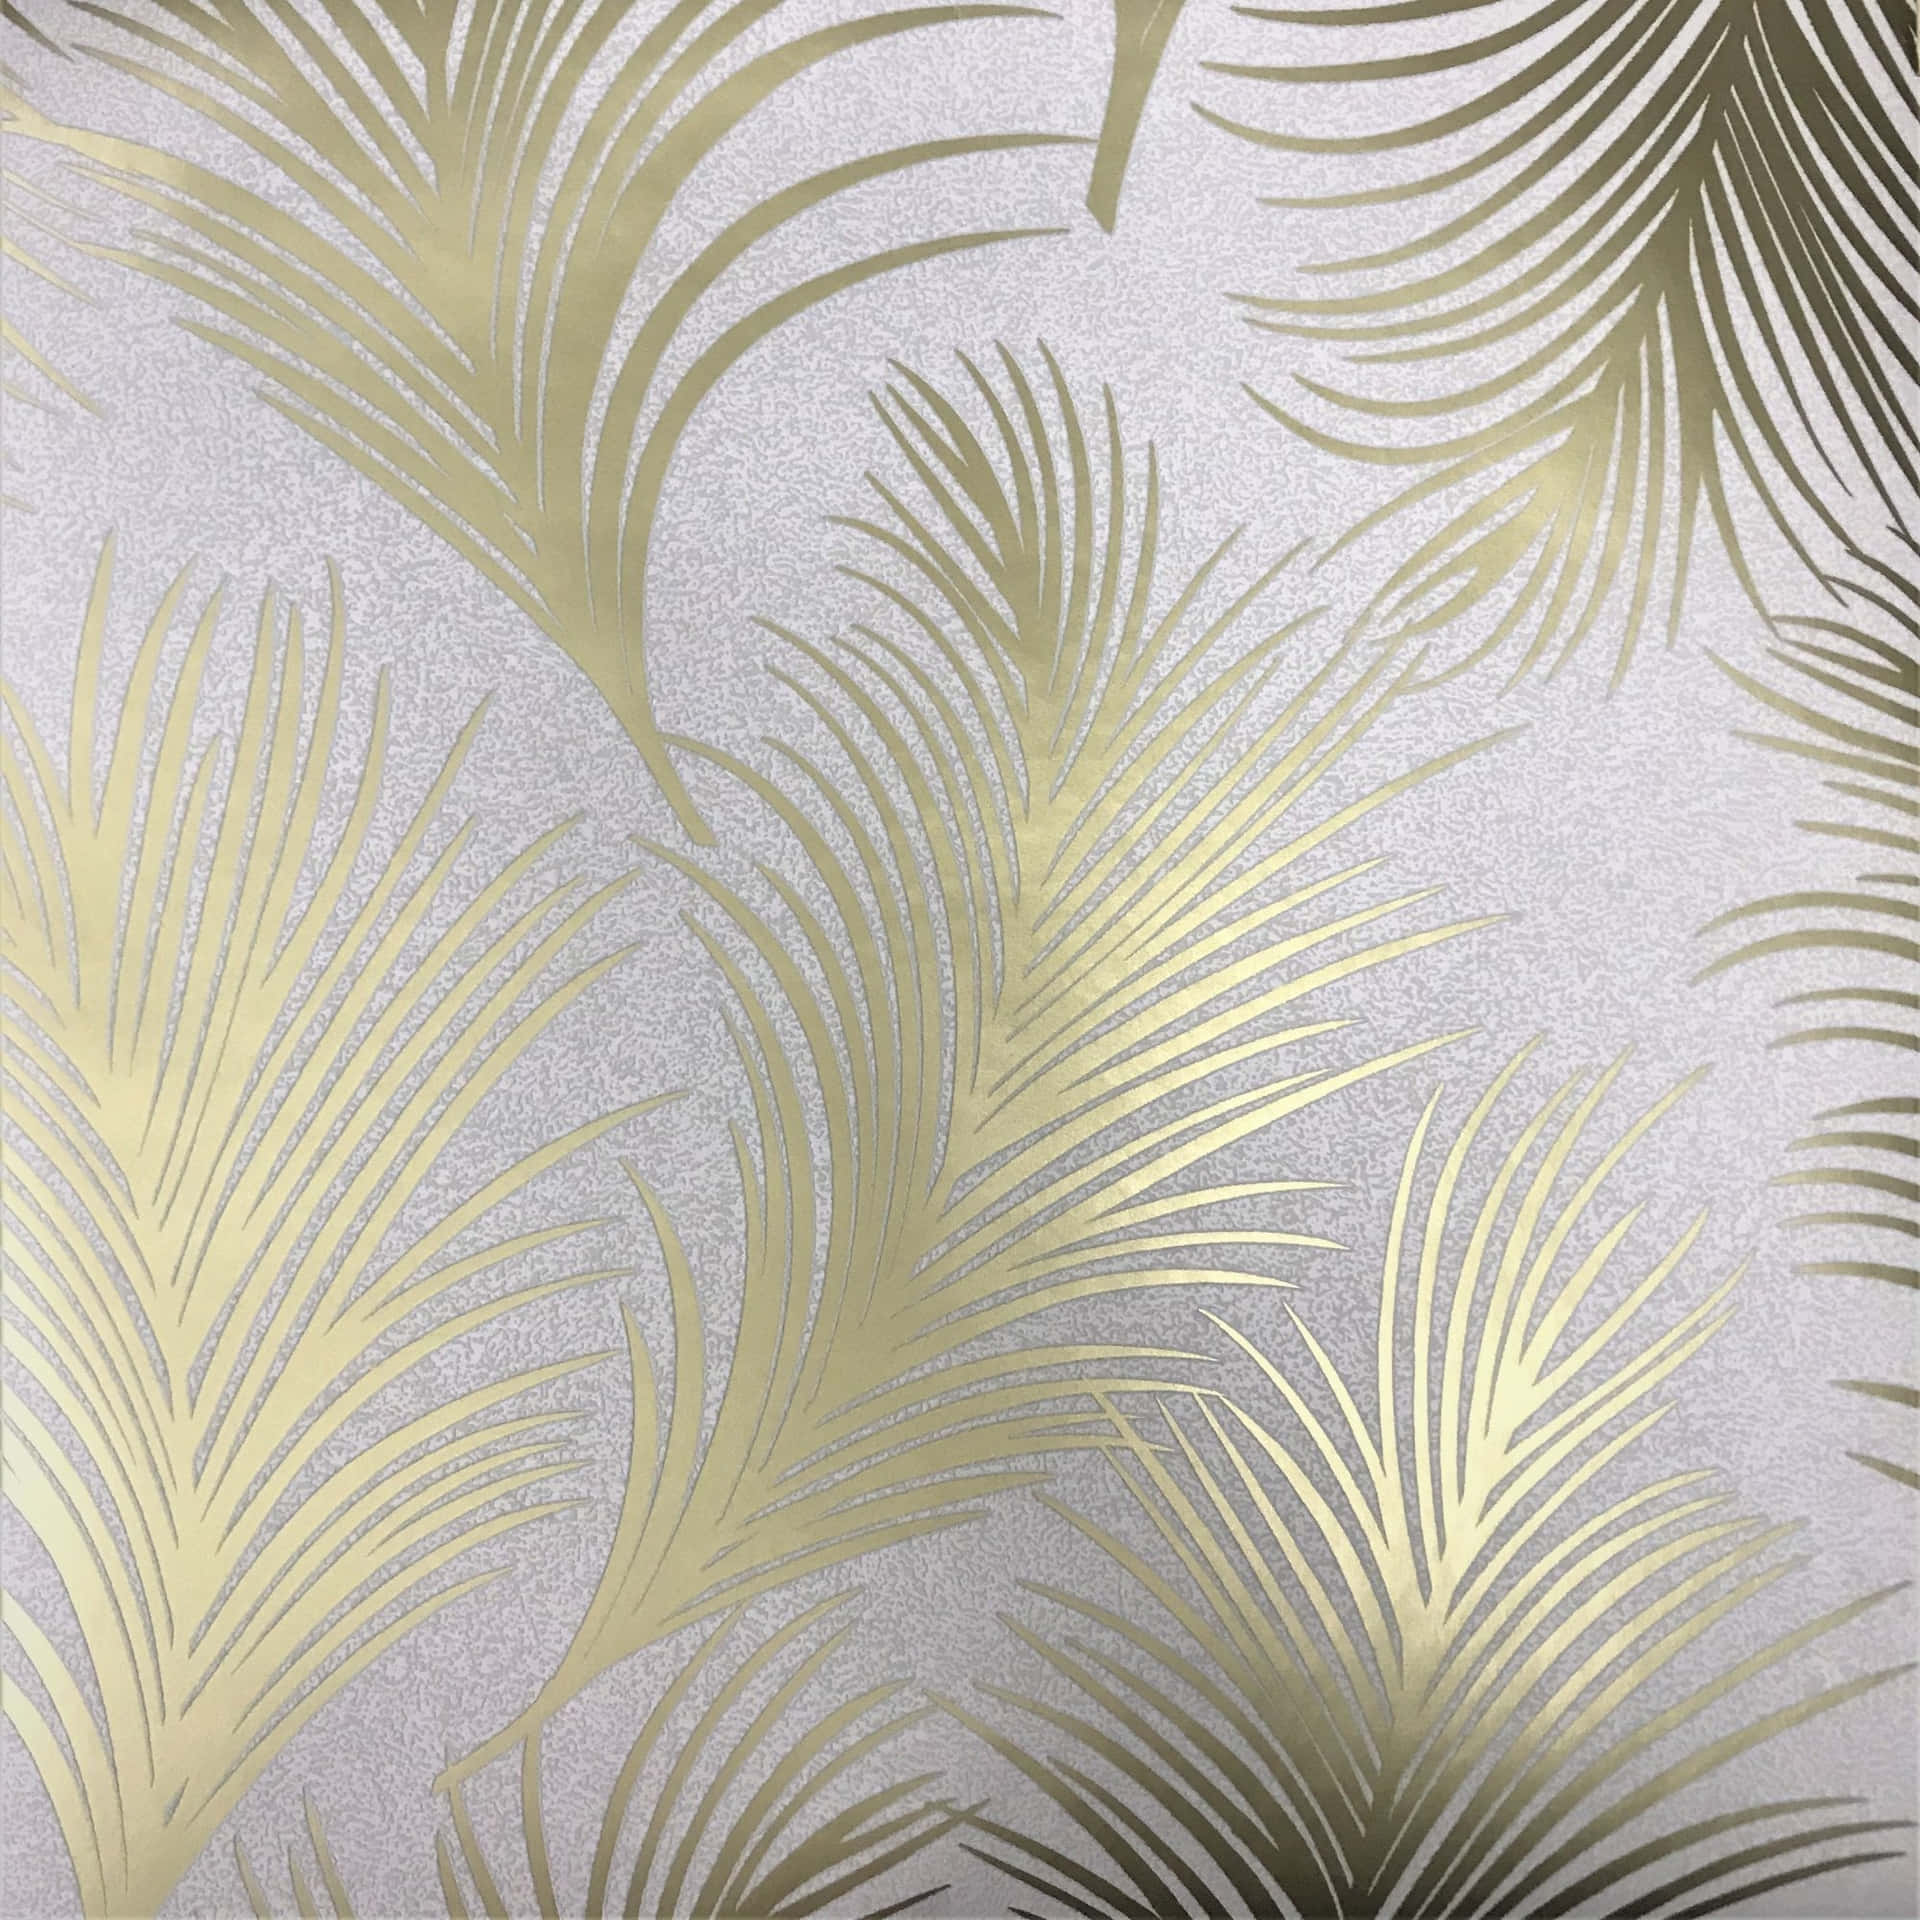 Tropical Leaves Gold Metallic Background